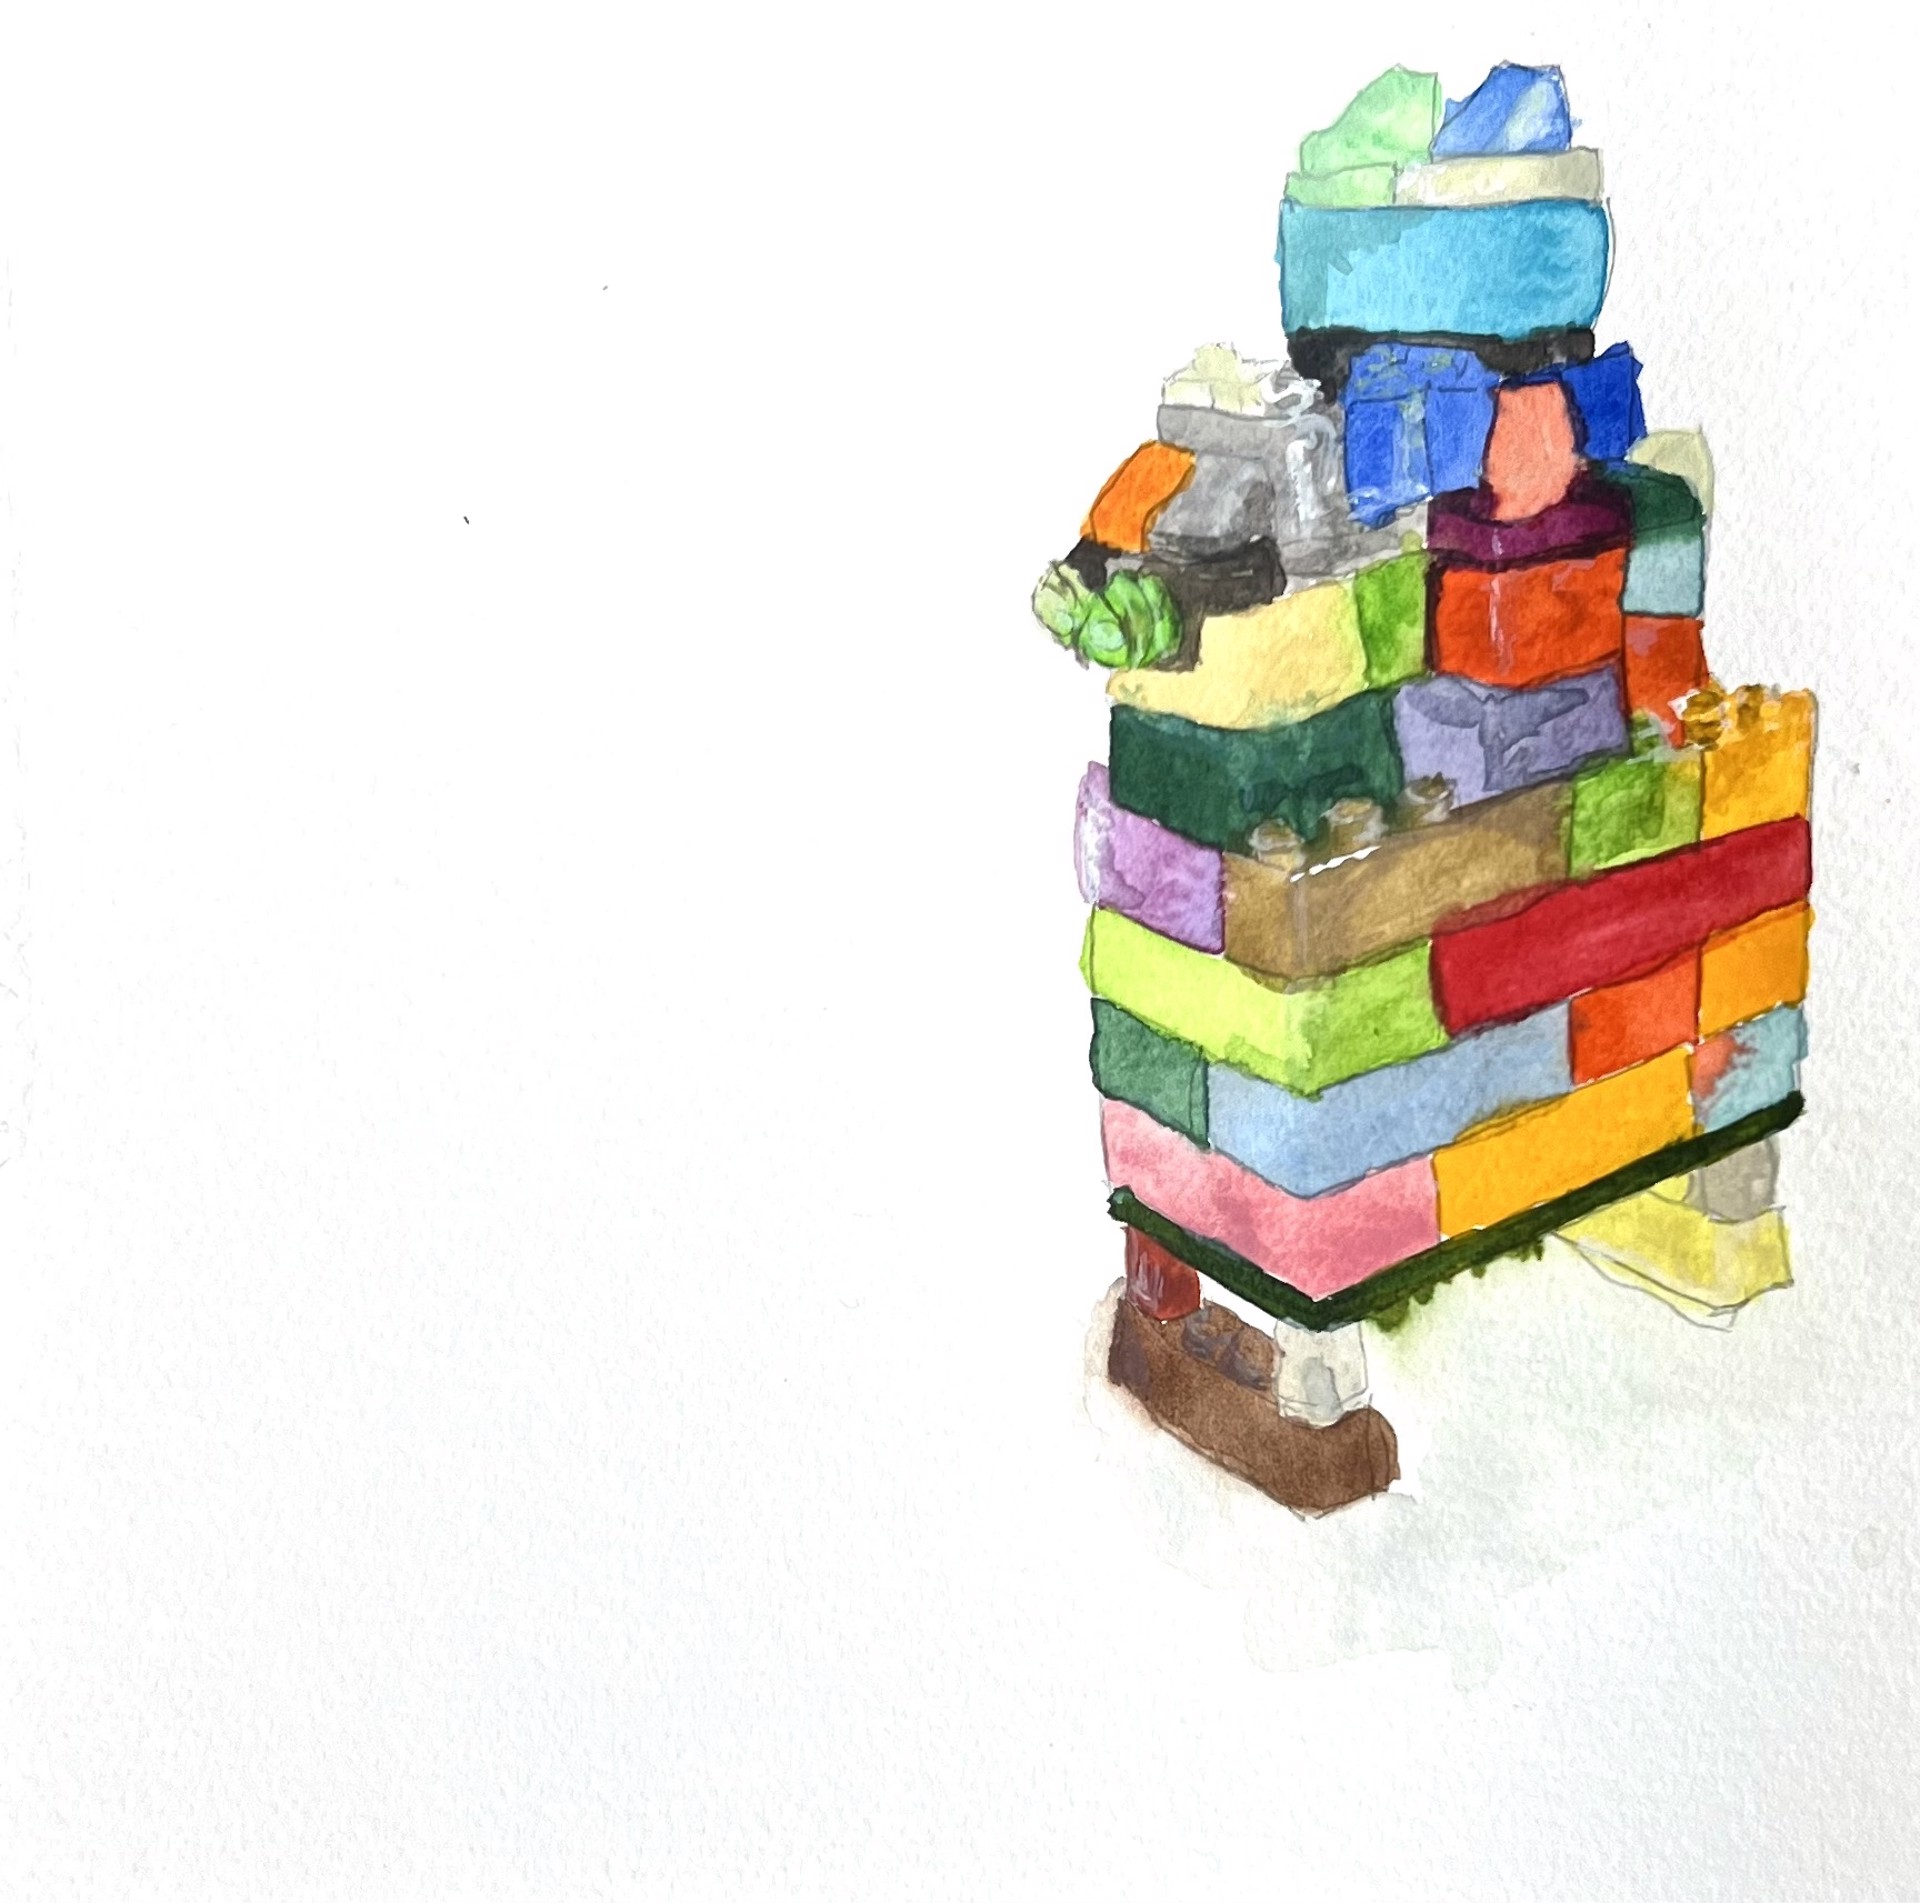 LEGO Study #2.2 by Kate Fisher